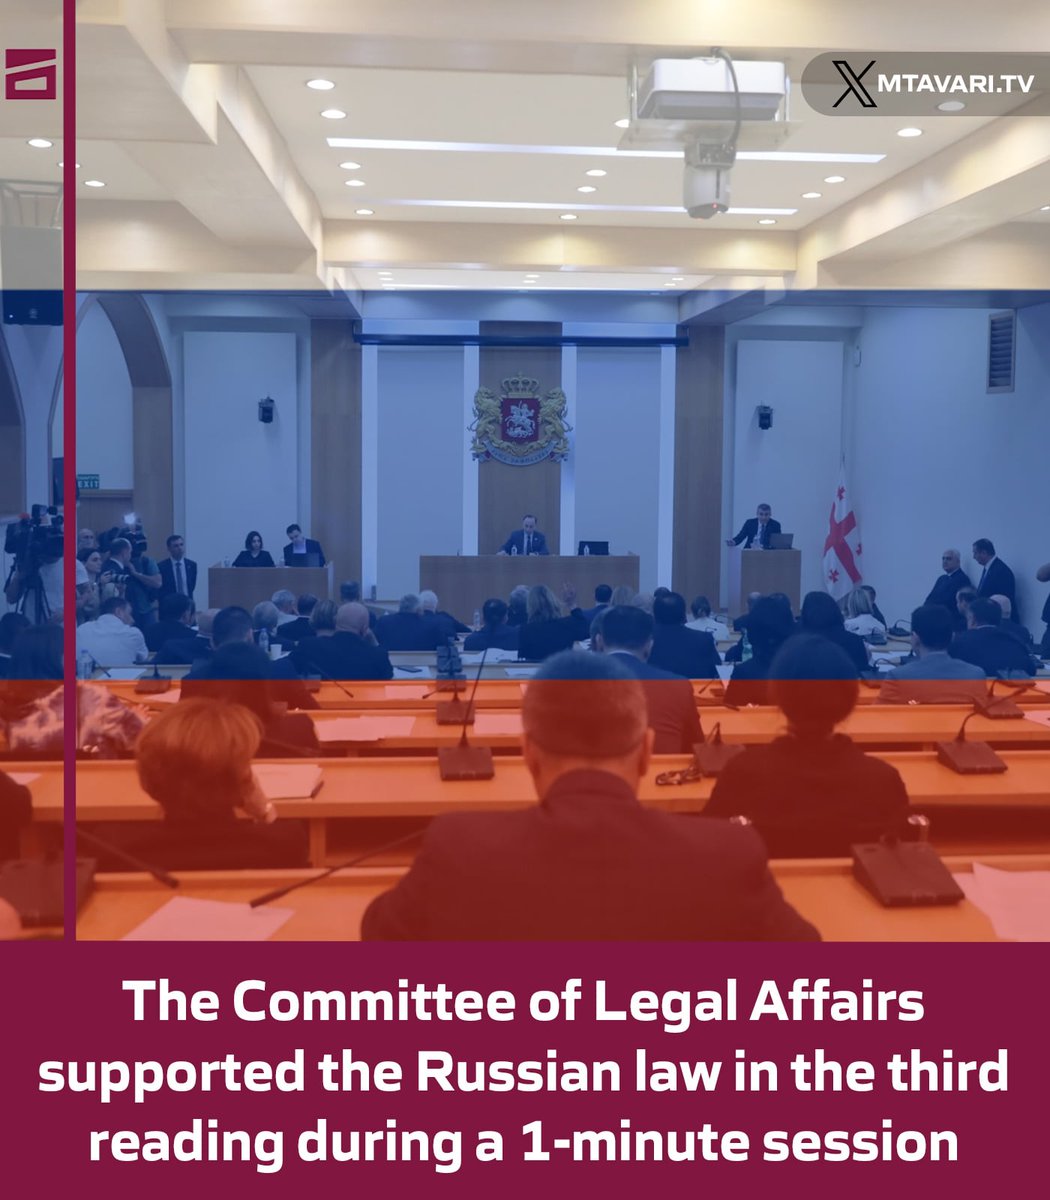 The Committee of Legal Affairs supported the Russian law in the third reading during a 1-minute session #Geoegia #NoToRussianLaw